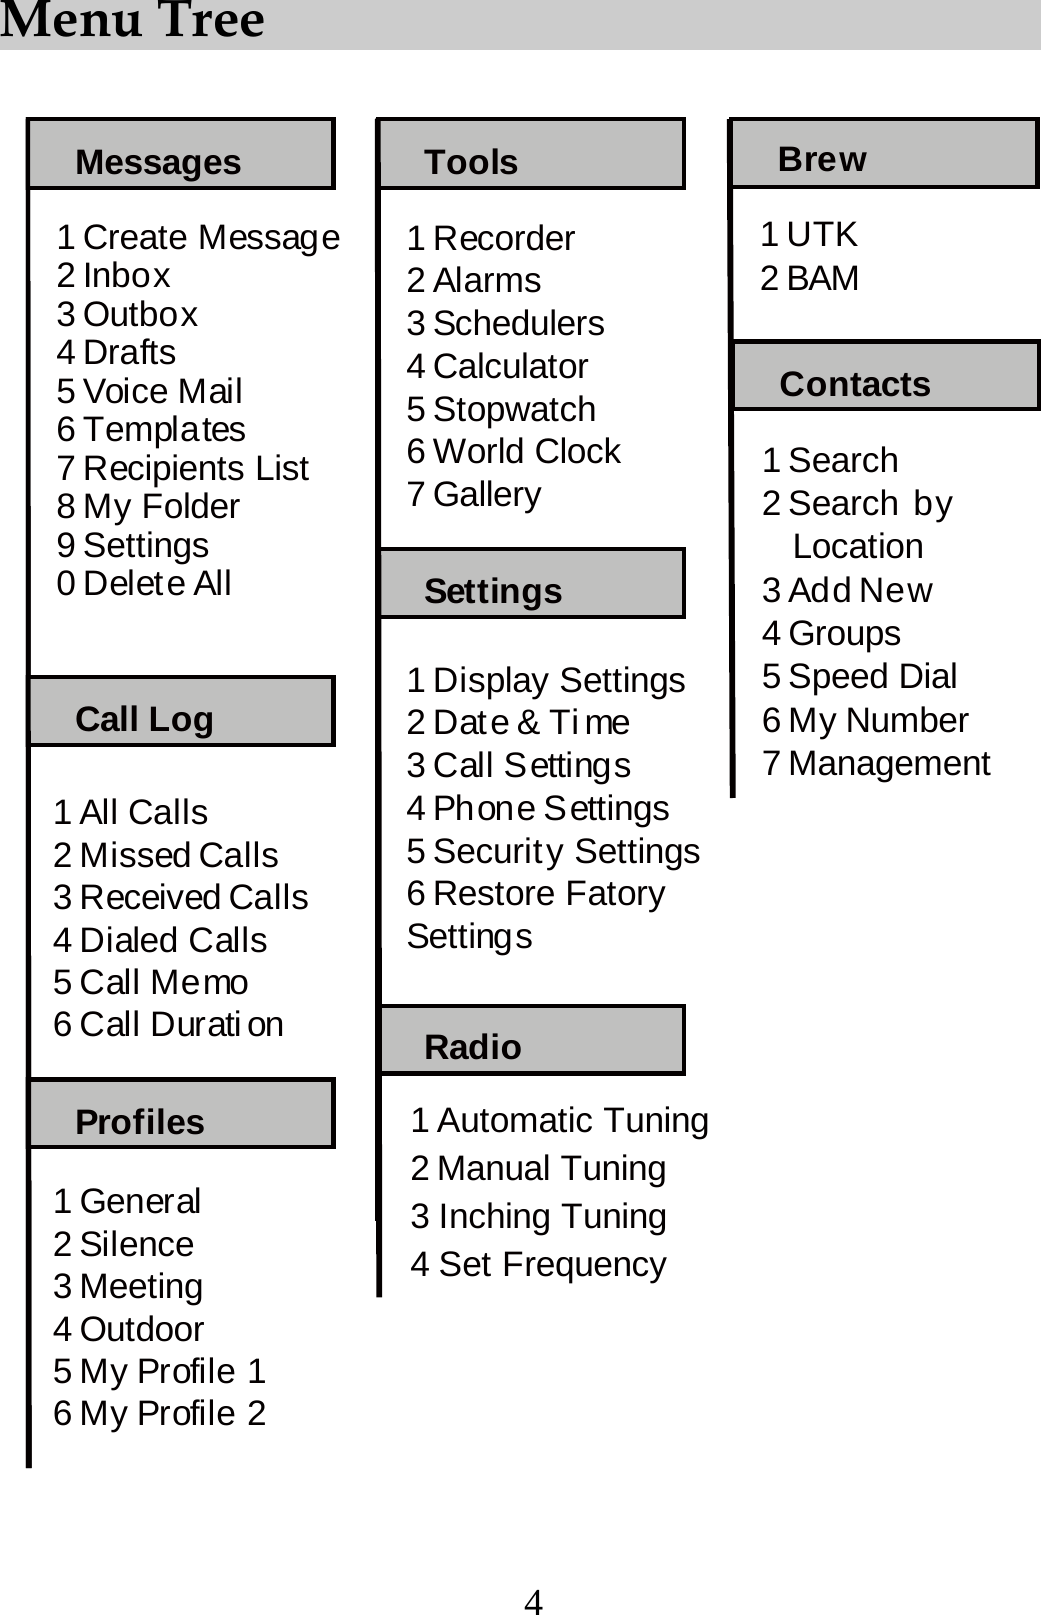 4 Menu Tree  1AllCalls2 Missed Calls3ReceivedCalls4 Dialed Calls5CallMemo6 Call Durati on1 Create Message2 Inbox3 Outbox4Drafts5VoiceMail6Templates7 Recipients List8My Folder9 Settings0 Delet e AllTools1 Automatic Tuning2 Manual Tuning1 General2 Silence3 Meeting4 Outdoor5MyProfile16MyProfile21 Display Settings2Date&amp;Time3 Call Settings4 Phone Settings5 Security Settings6 Restore FatorySettings1 Search2 Search by3AddNew4 Groups5 Speed Dial6 My Number7 Management1 Recorder2Alarms3 Schedulers4Calculator5Stopwatch6 World Clock7 GalleryProfilesContactsSettingsCall HistoryBrewMessages ToolsProfilesContactsSettingsCall LogRadioMessages   Location1UTK2 BAMBrewBrew3 Inching Tuning4 Set Frequency 